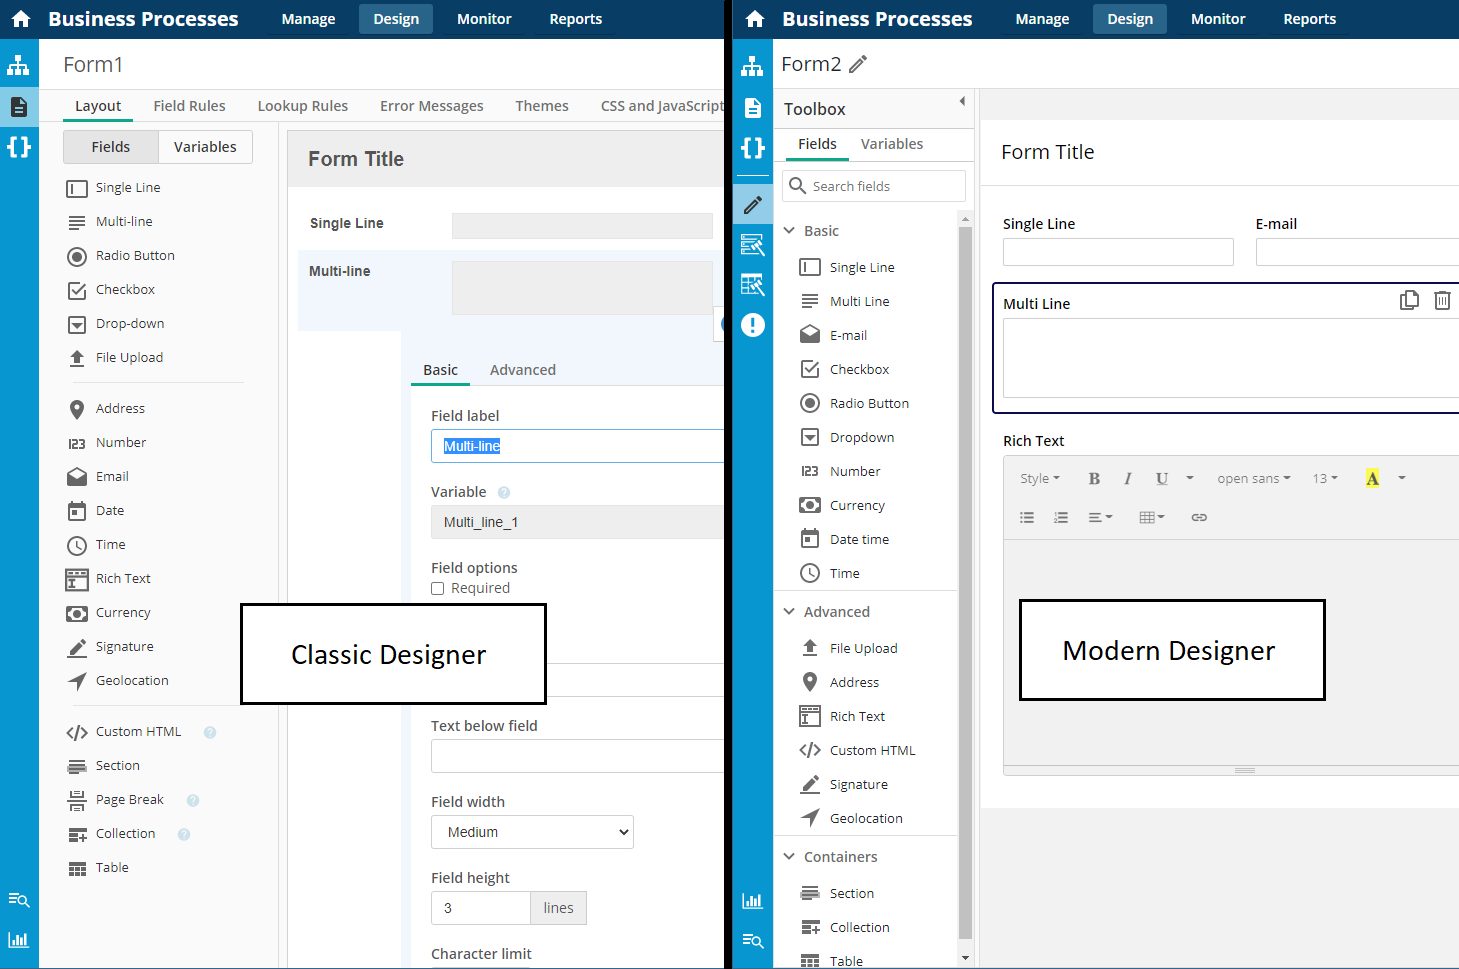 Comparison of Classic and Modern layout of the form designer